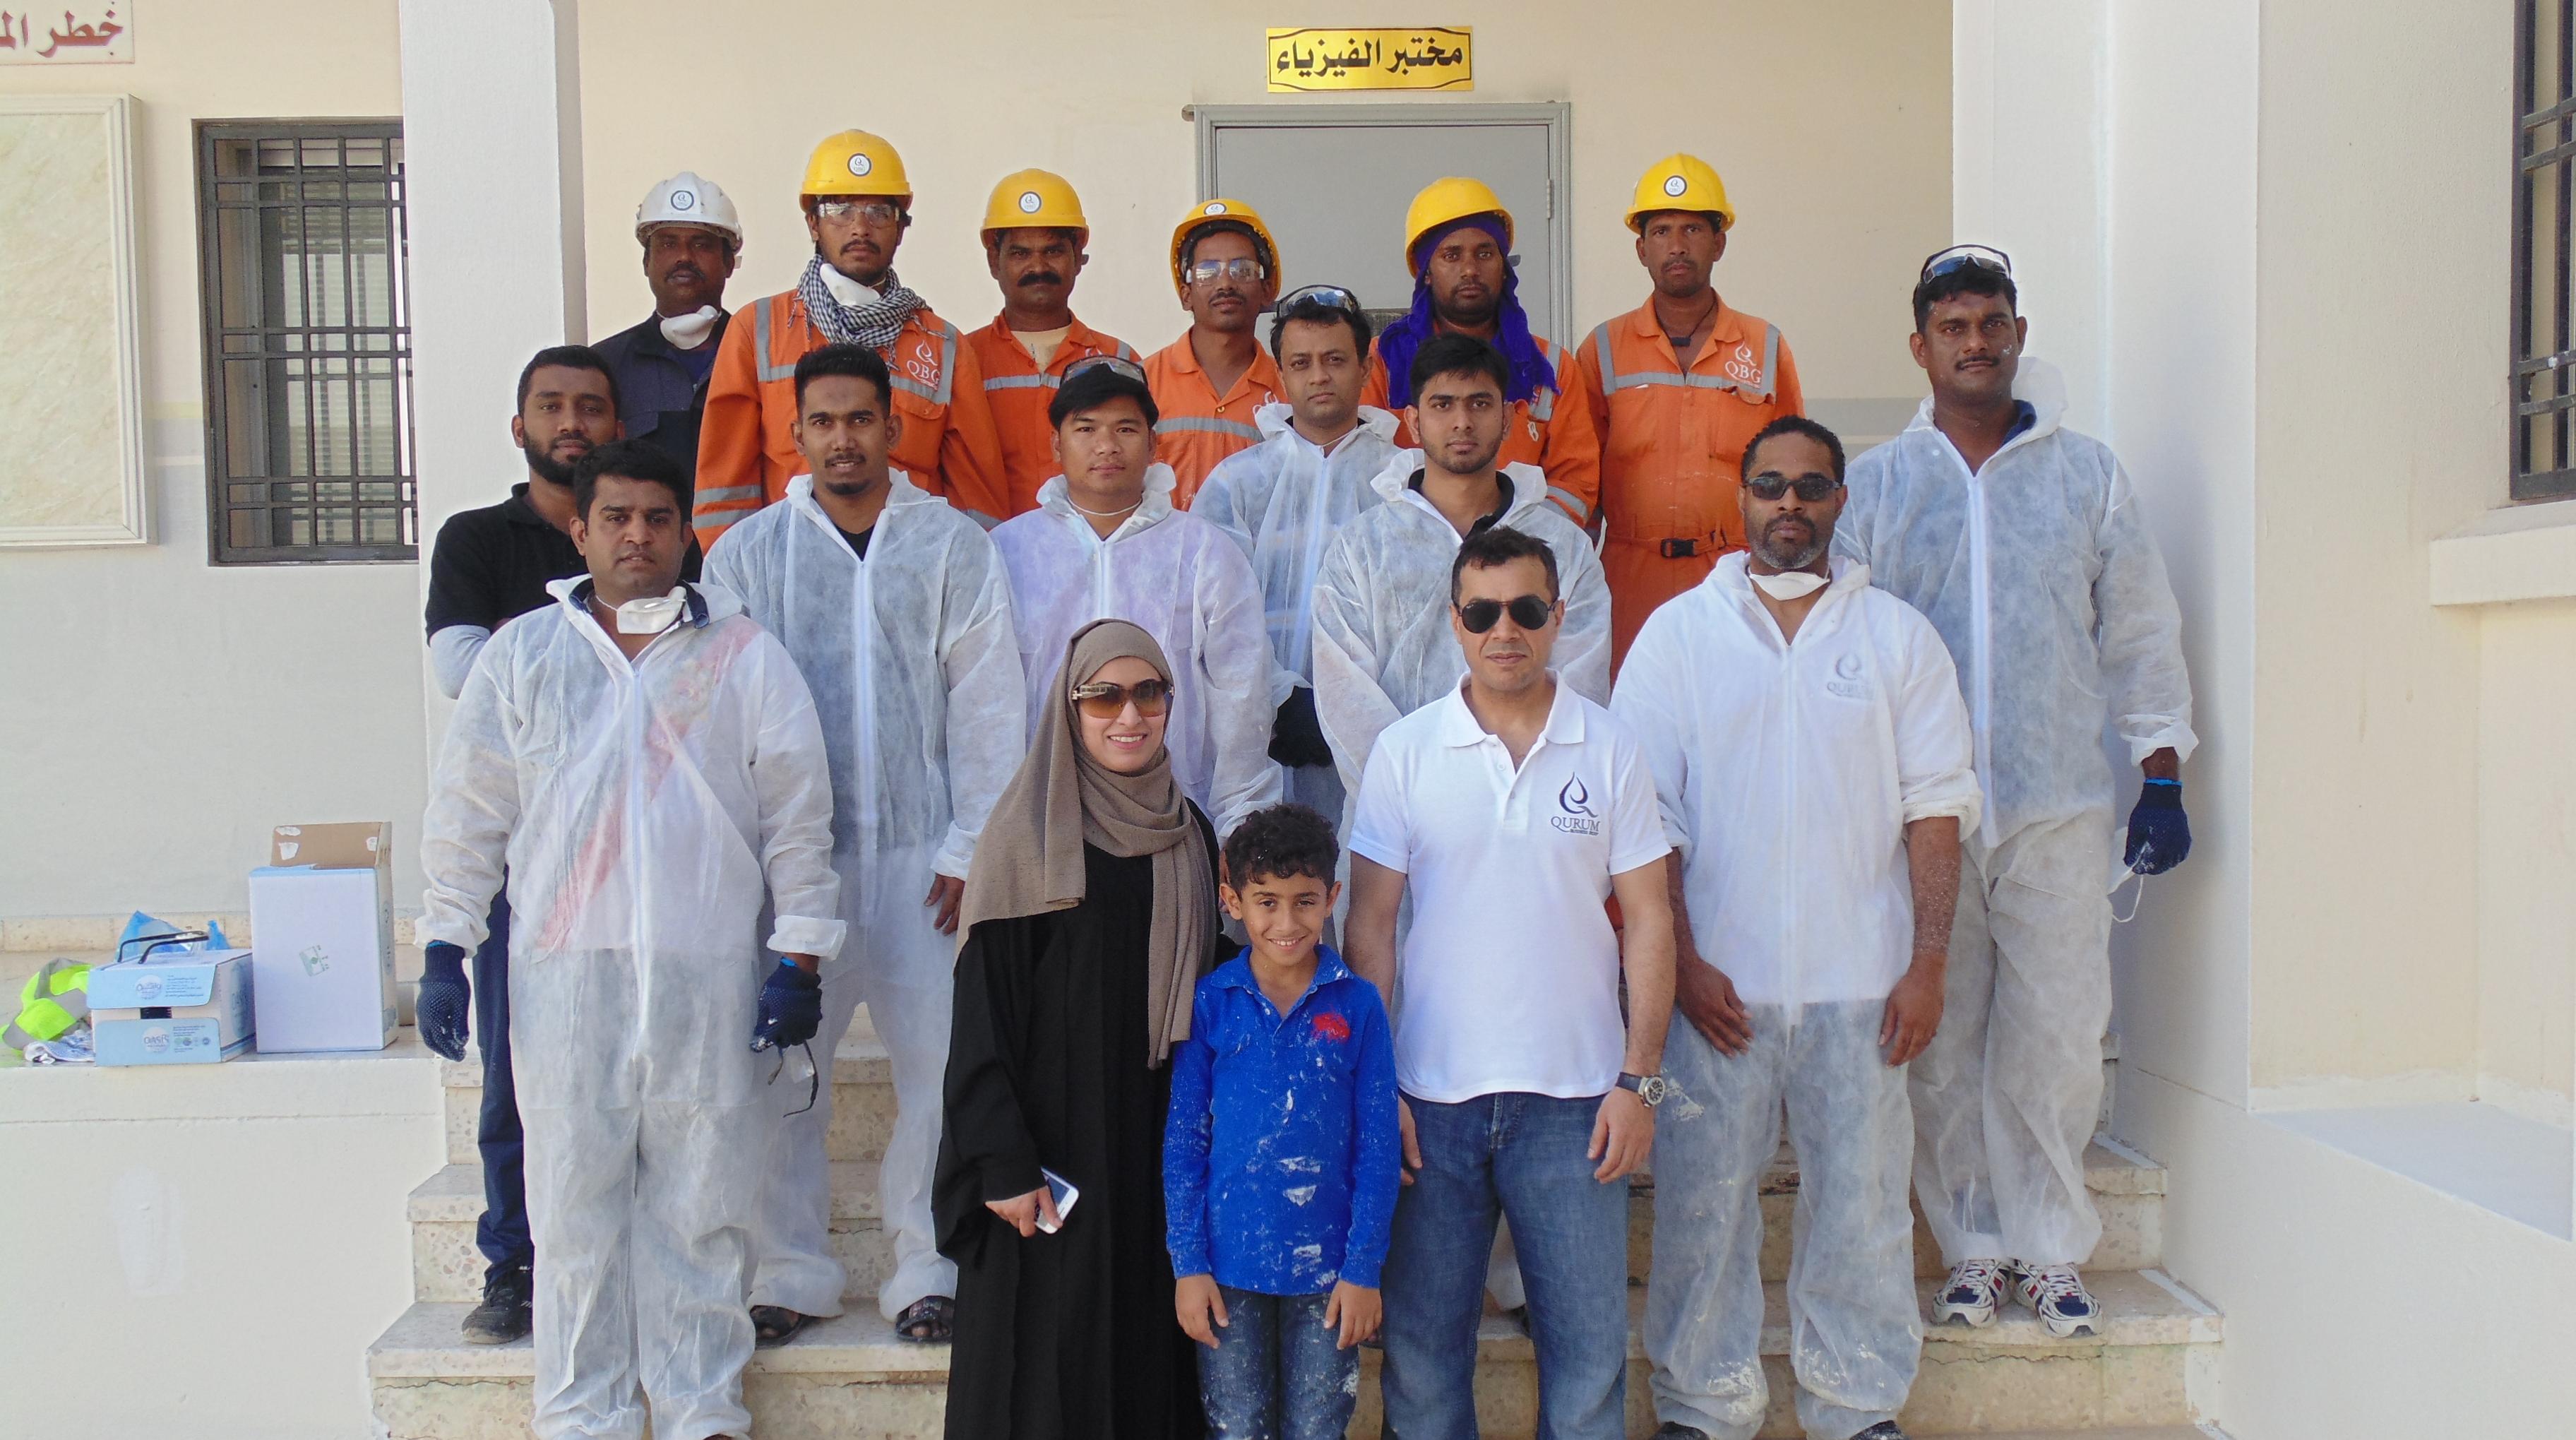 QBG Echoes Launches First Community Outreach Project From Al Khabourah